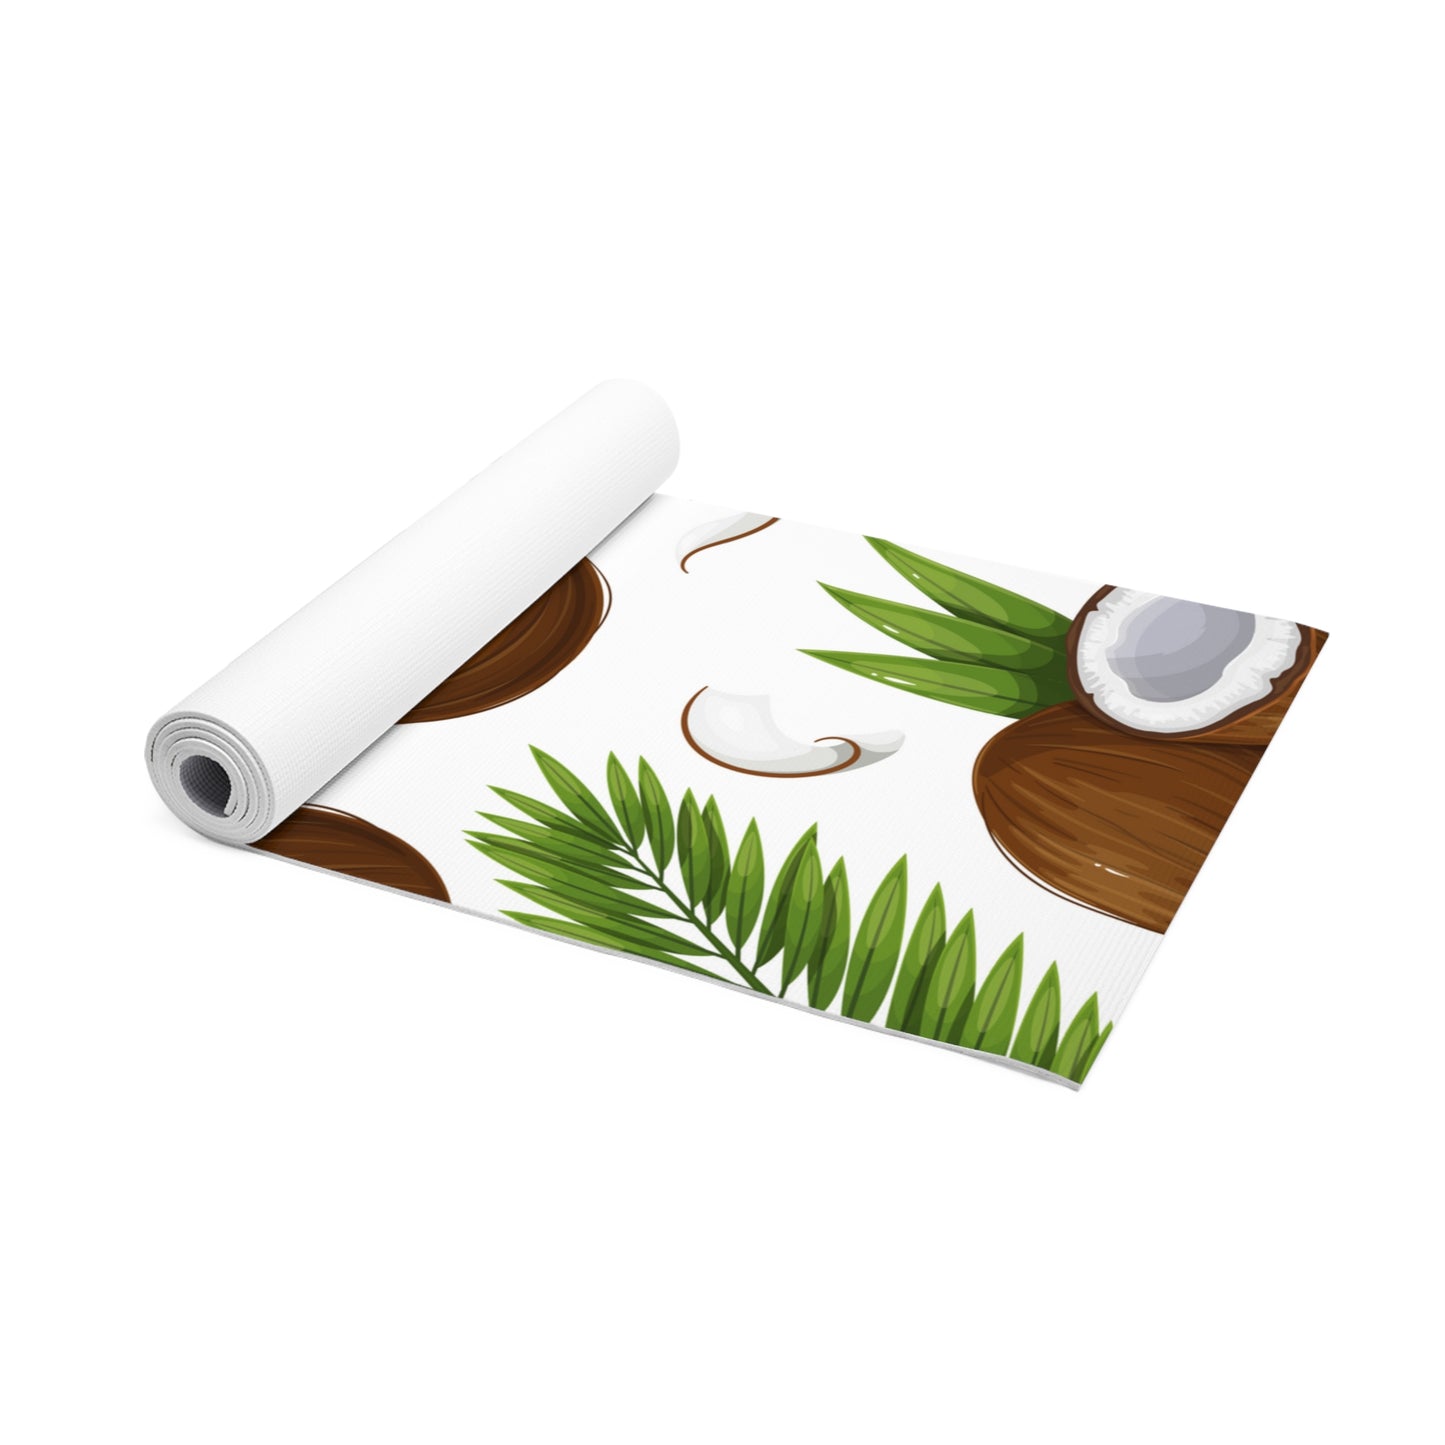 Coconuts Foam Yoga Mat, Foam Material, Lightweight, and Cushions You From Impacts, 24" x 72" x .25"